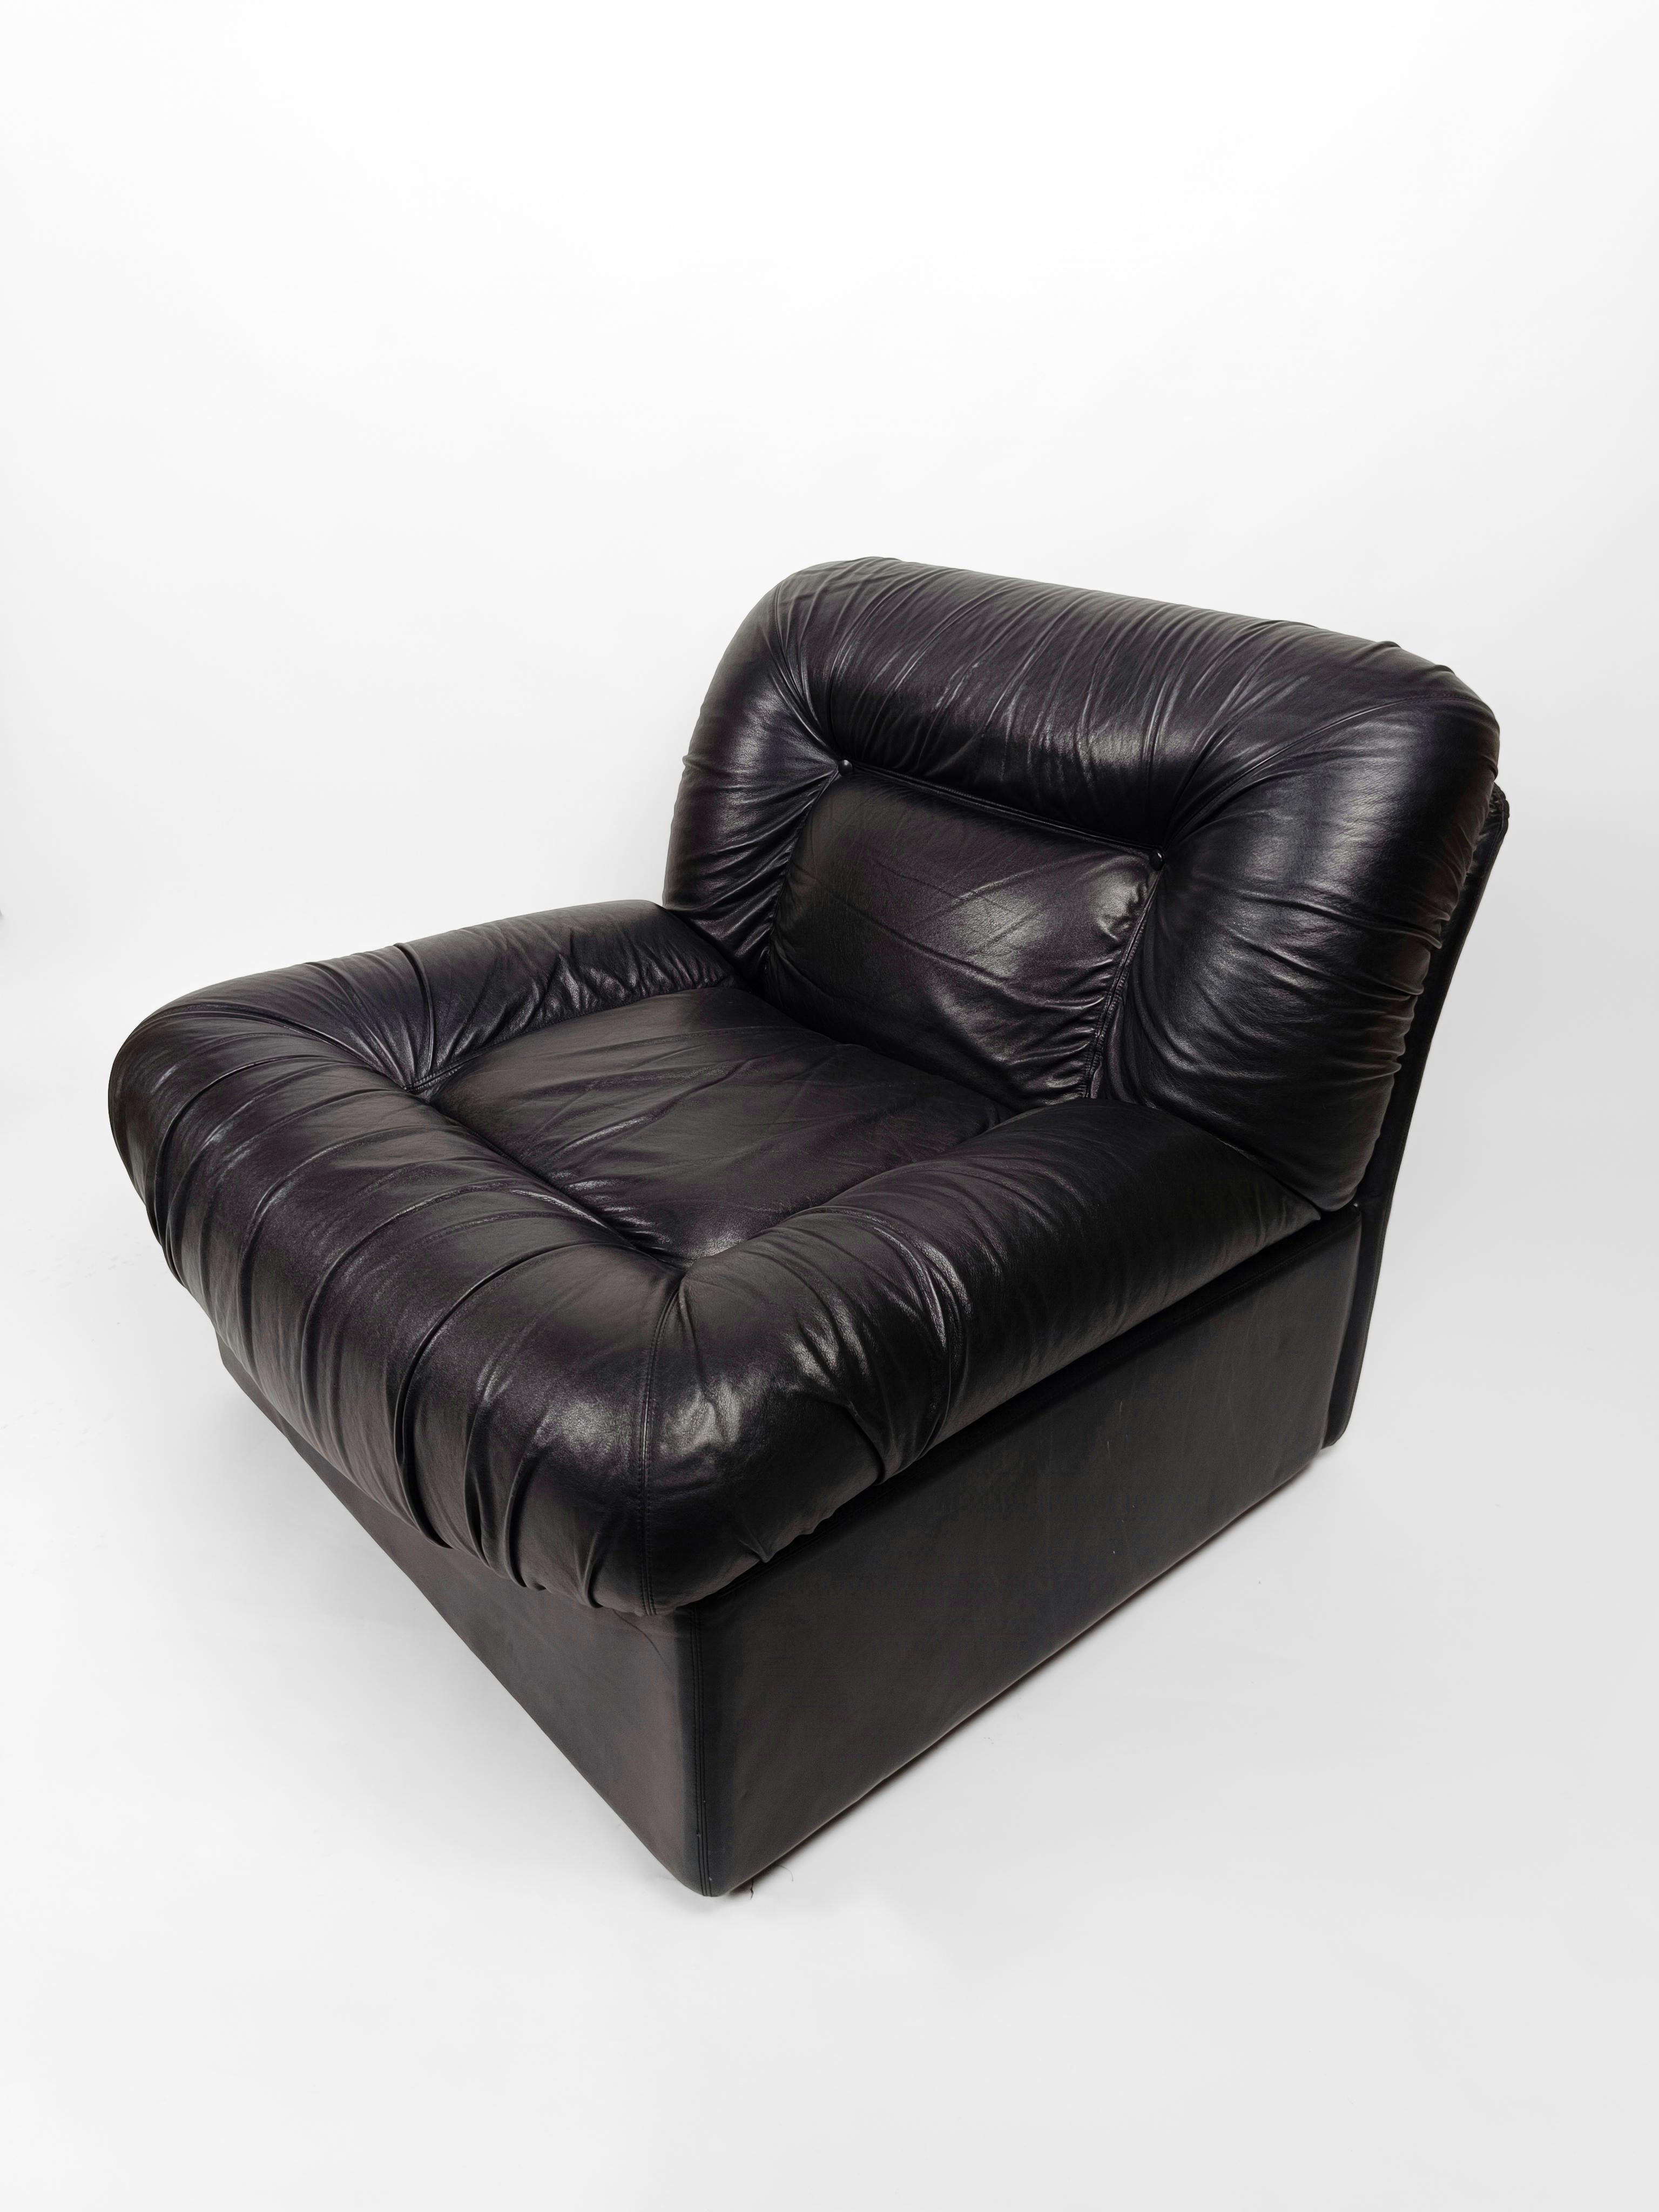 Faux Leather Italian Modular Lounge Chair in Black Leather model PANAREA by Lev & Lev, 1970s  For Sale